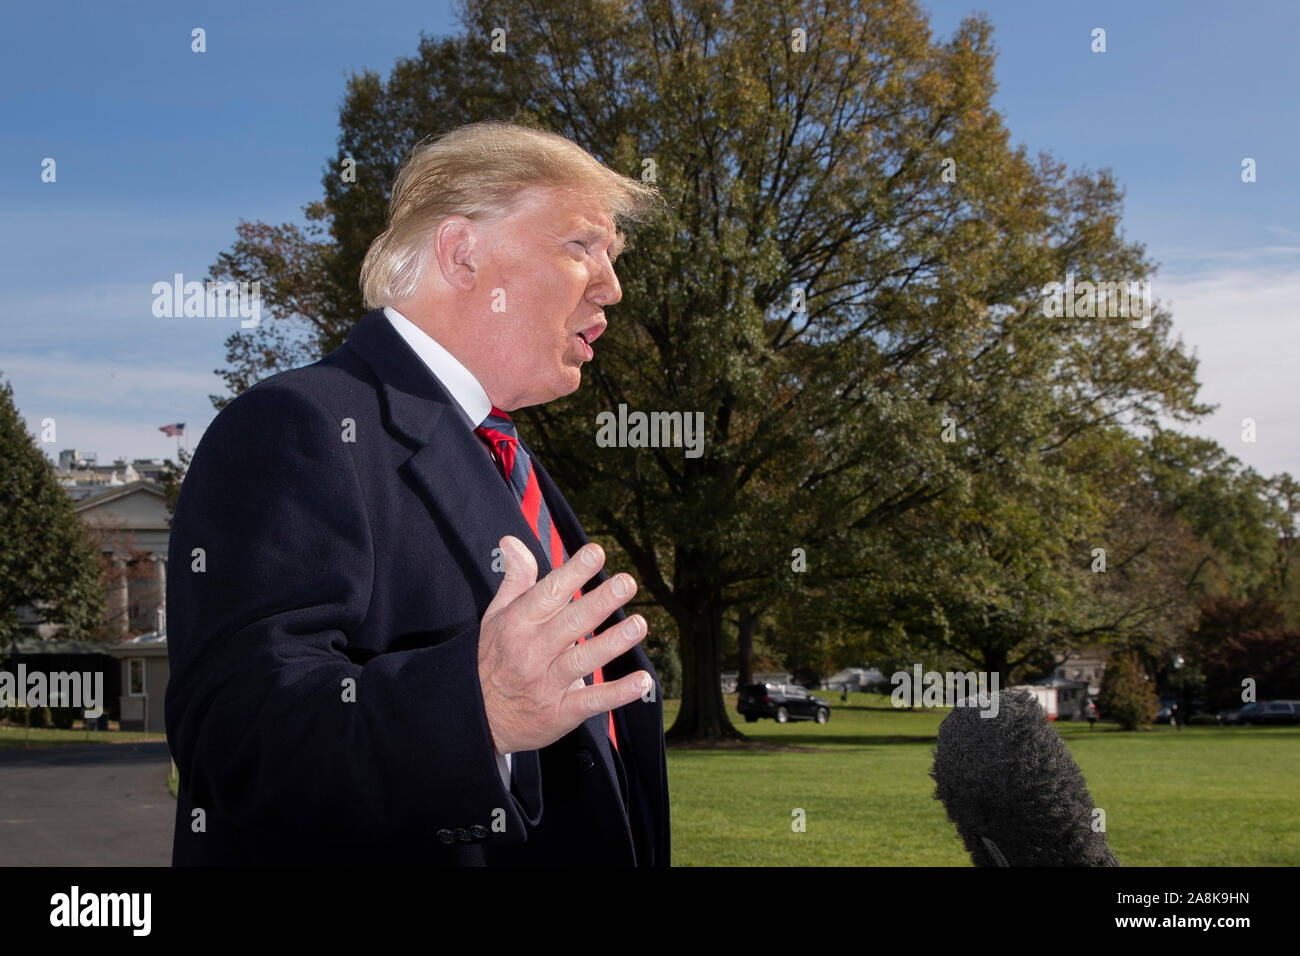 Washington DC, USA. 09th Nov, 2019. US President Donald J. Trump delivers brief remarks to members of the news media before departing with First Lady Melania Trump (not pictured) on the South Lawn of the White House in Washington, DC, USA, 09 November 2019. The President and First Lady will attend a National Collegiate Athletic Association (NCAA) football game between Alabama and Louisiana State University in Tuscaloosa, Alabama; then they will stay in New York City through Veterans Day. Credit: MediaPunch Inc/Alamy Live News Stock Photo